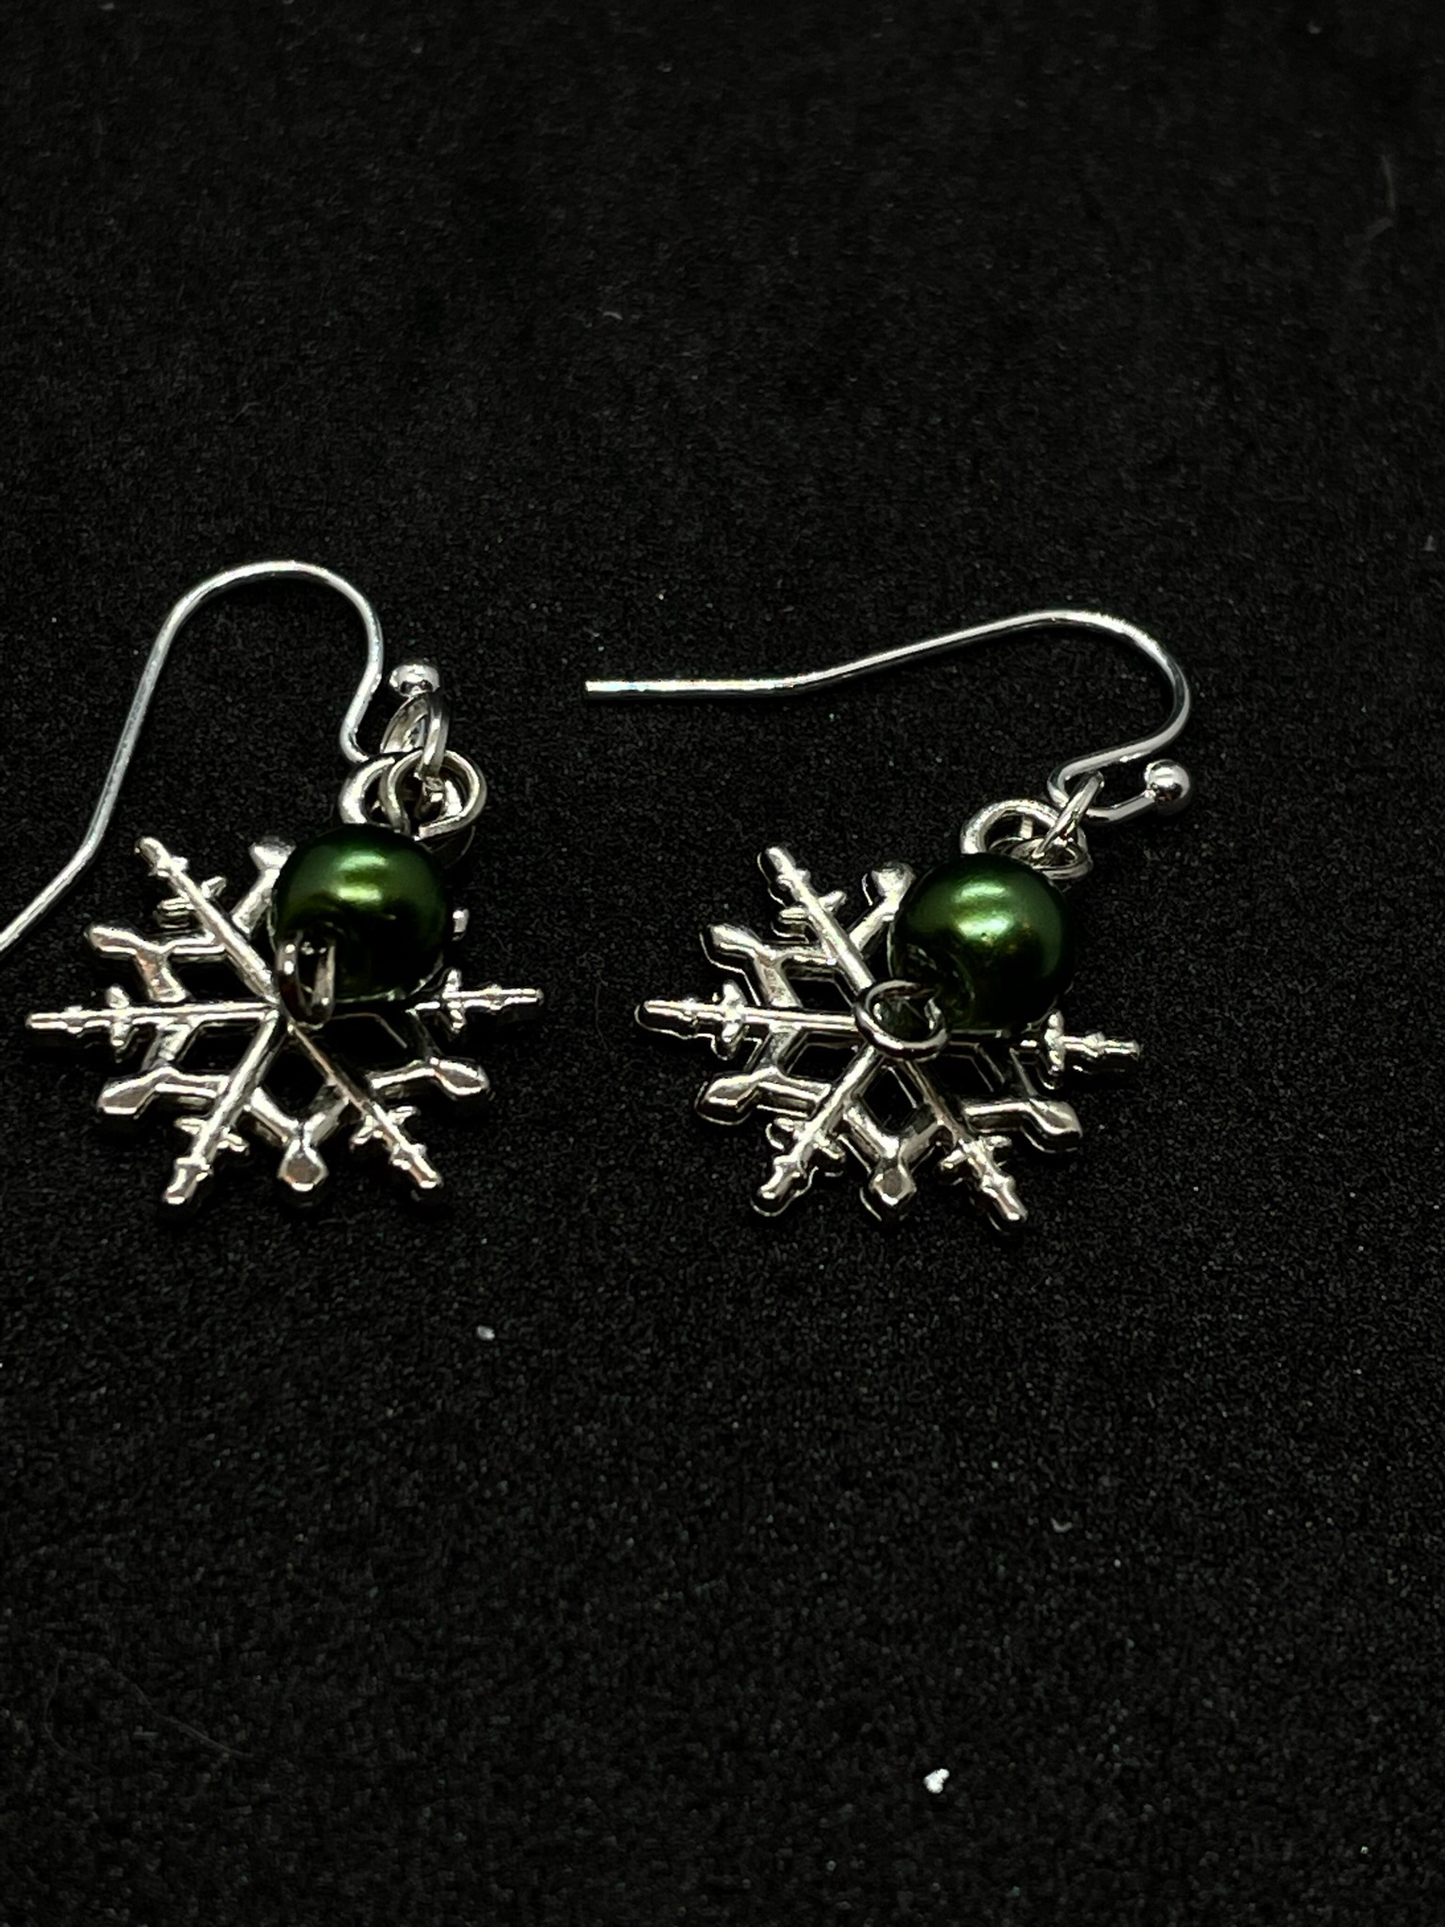 Festive snowflakes with coloured beads, drop earrings